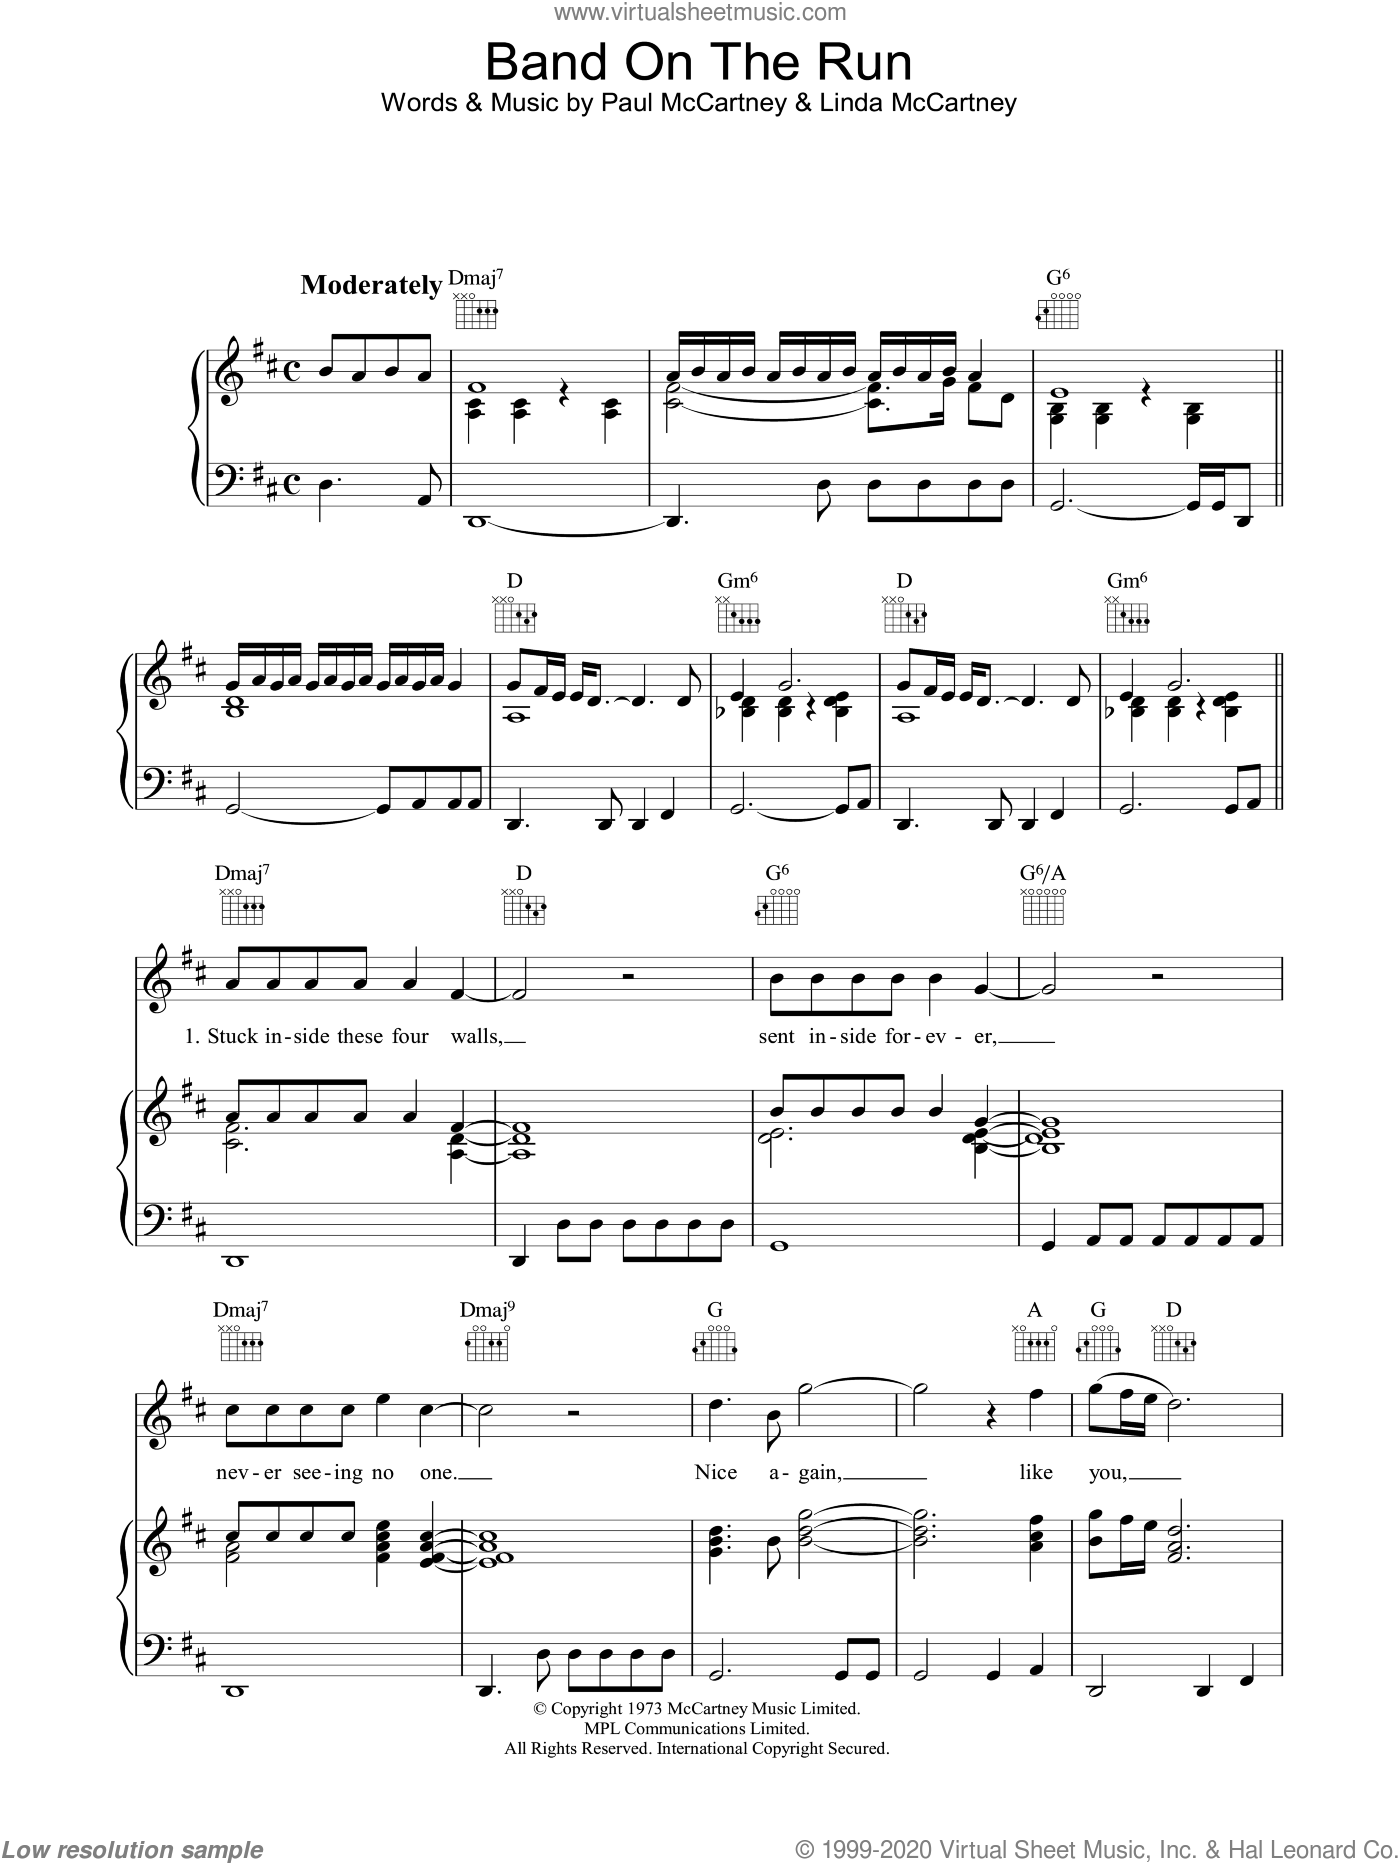 Band On The Run Sheet Music For Voice, Piano Or Guitar V2